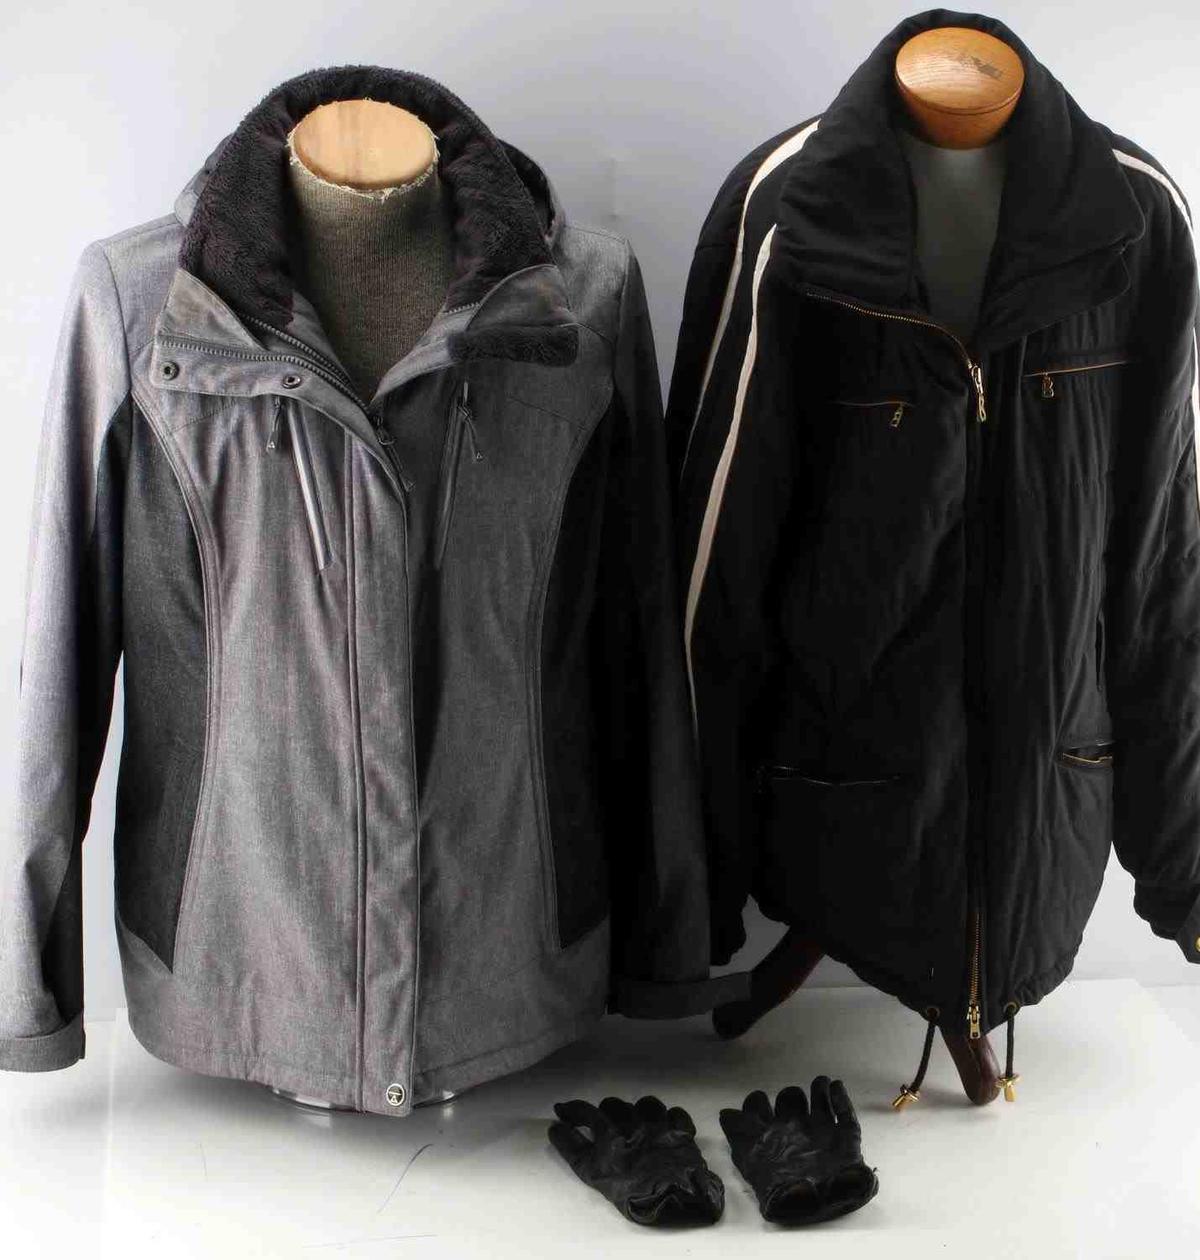 LOT OF 2 PREOWNED JACKETS GERRY & BOGNER ACTIVE